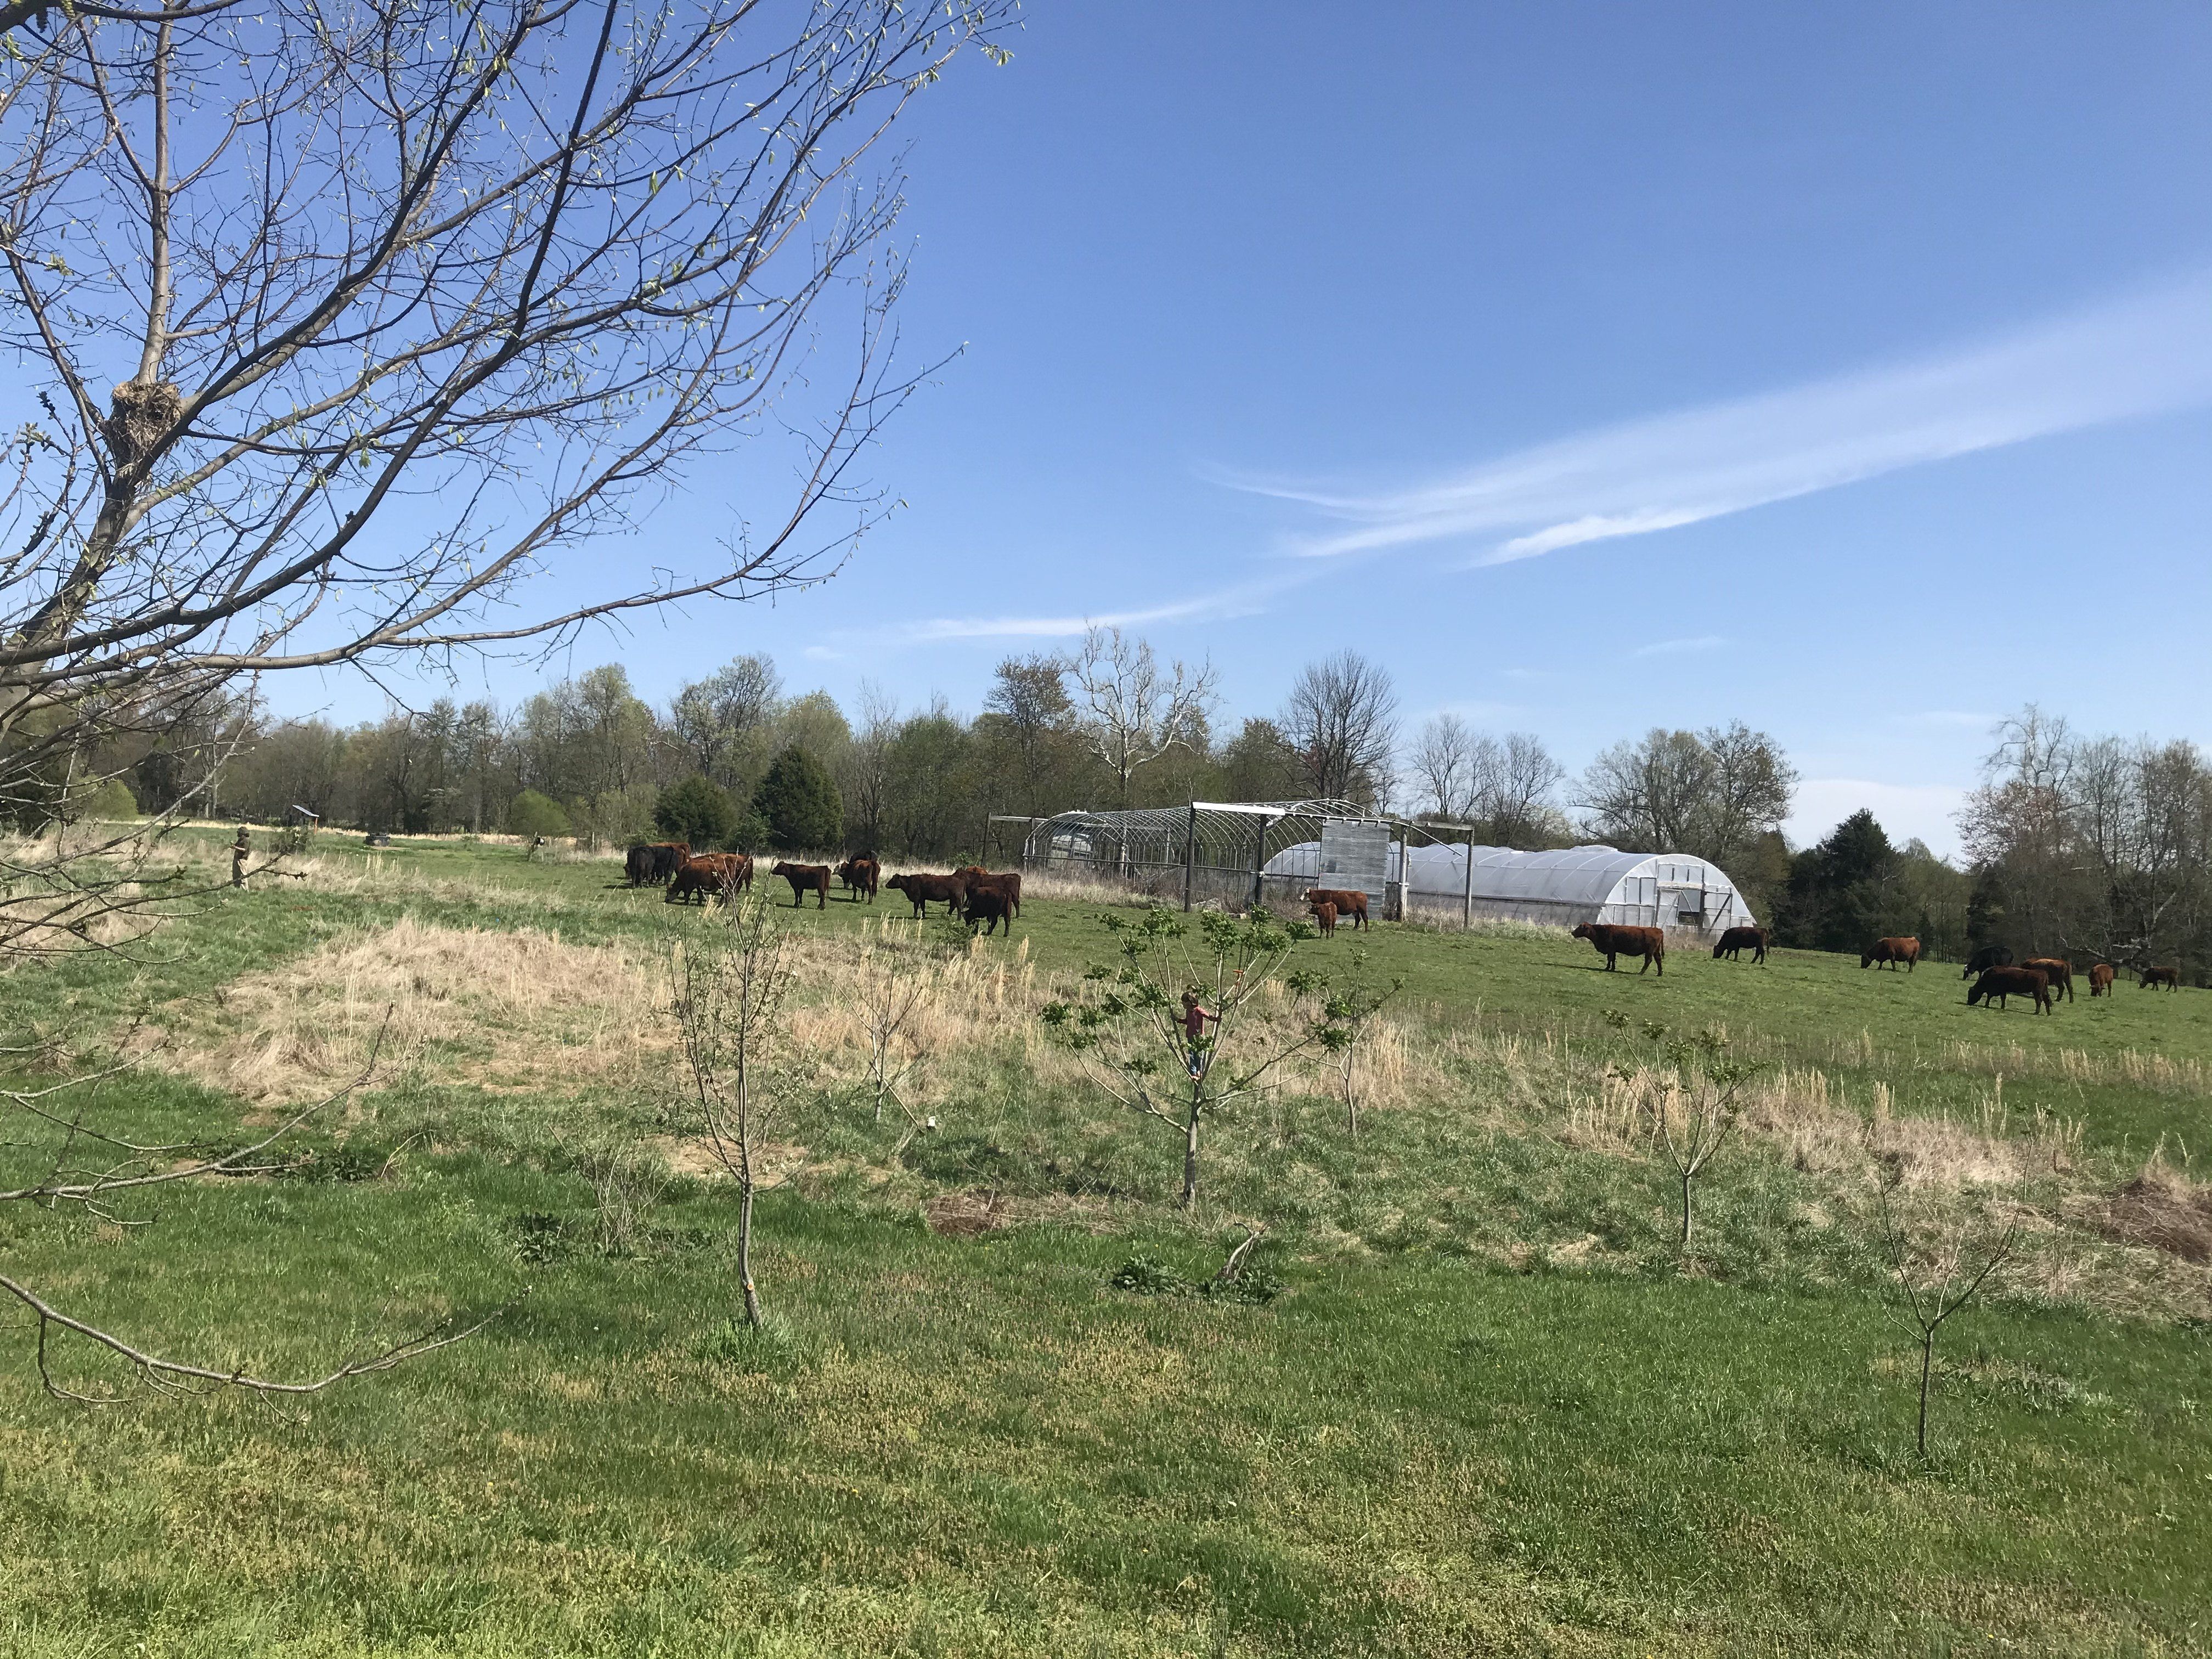 Previous Happening: Meat Farm Happenings for May 26, 2020